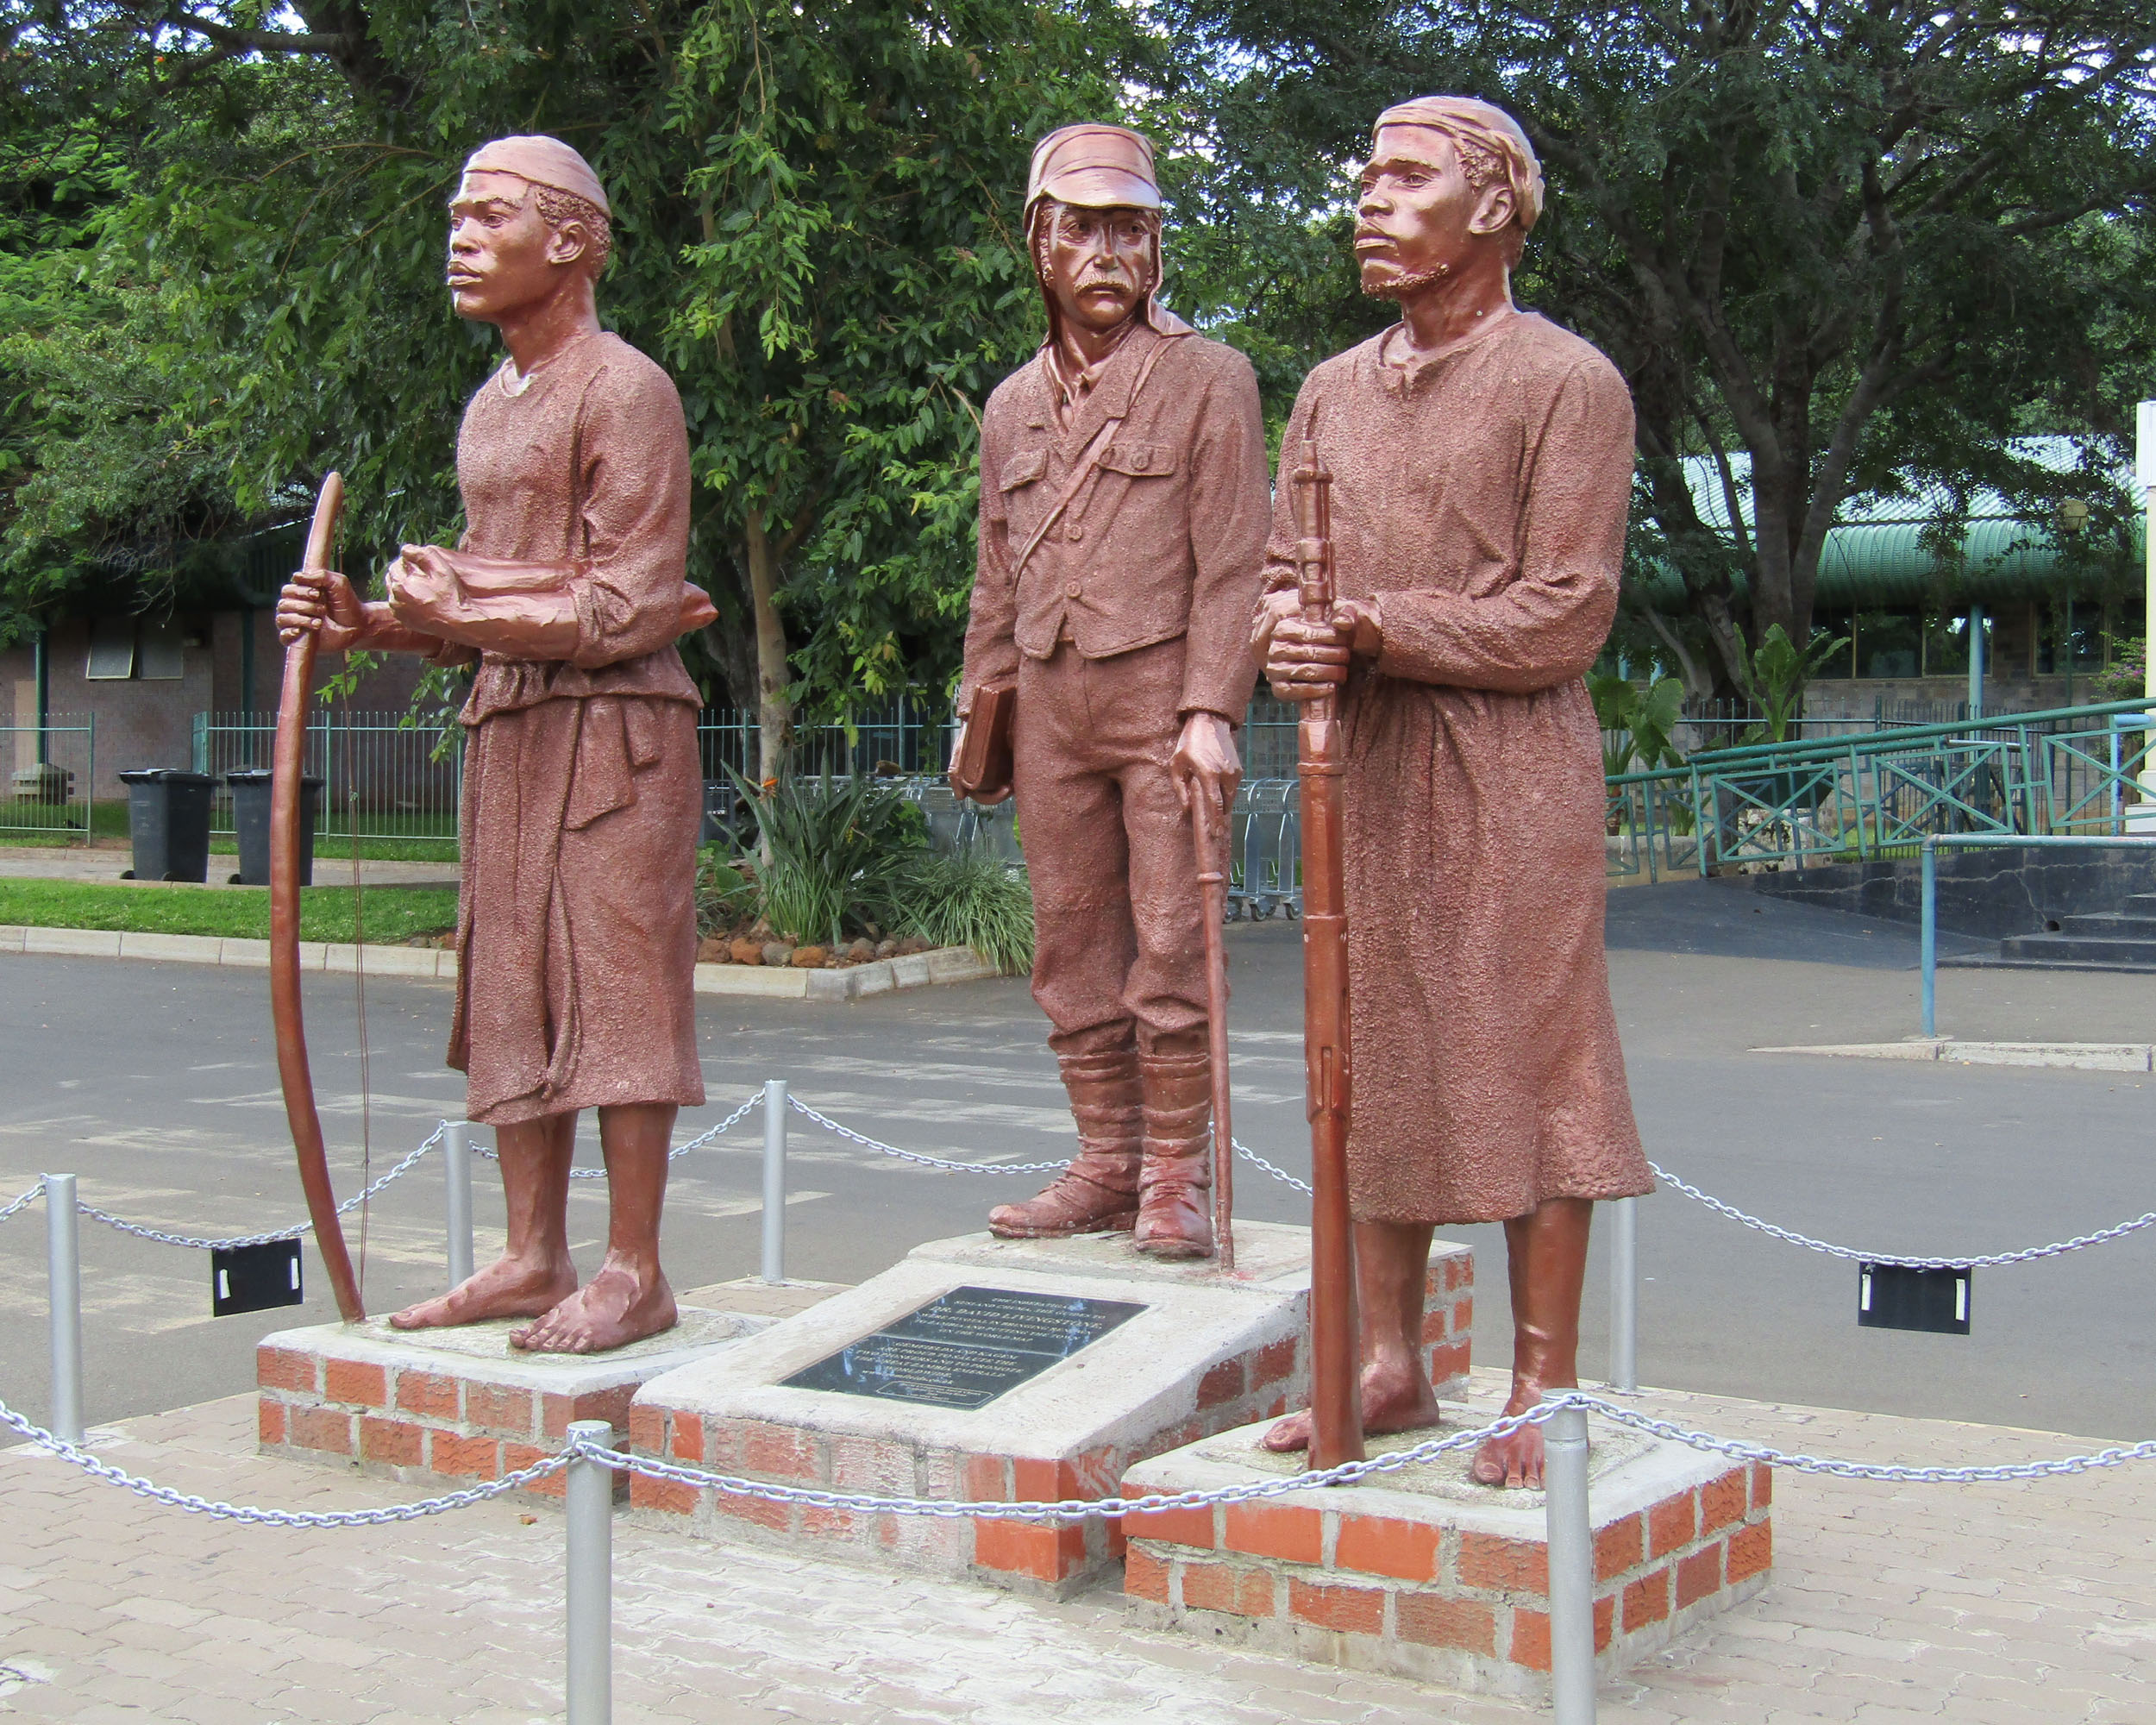 Statues of Susi, Livingstone, and Chuma in Livingstone Zambia, 2016. Copyright Jared McDonald. Creative Commons Attribution-NonCommercial 3.0 Unported (https://creativecommons.org/licenses/by-nc/3.0/)